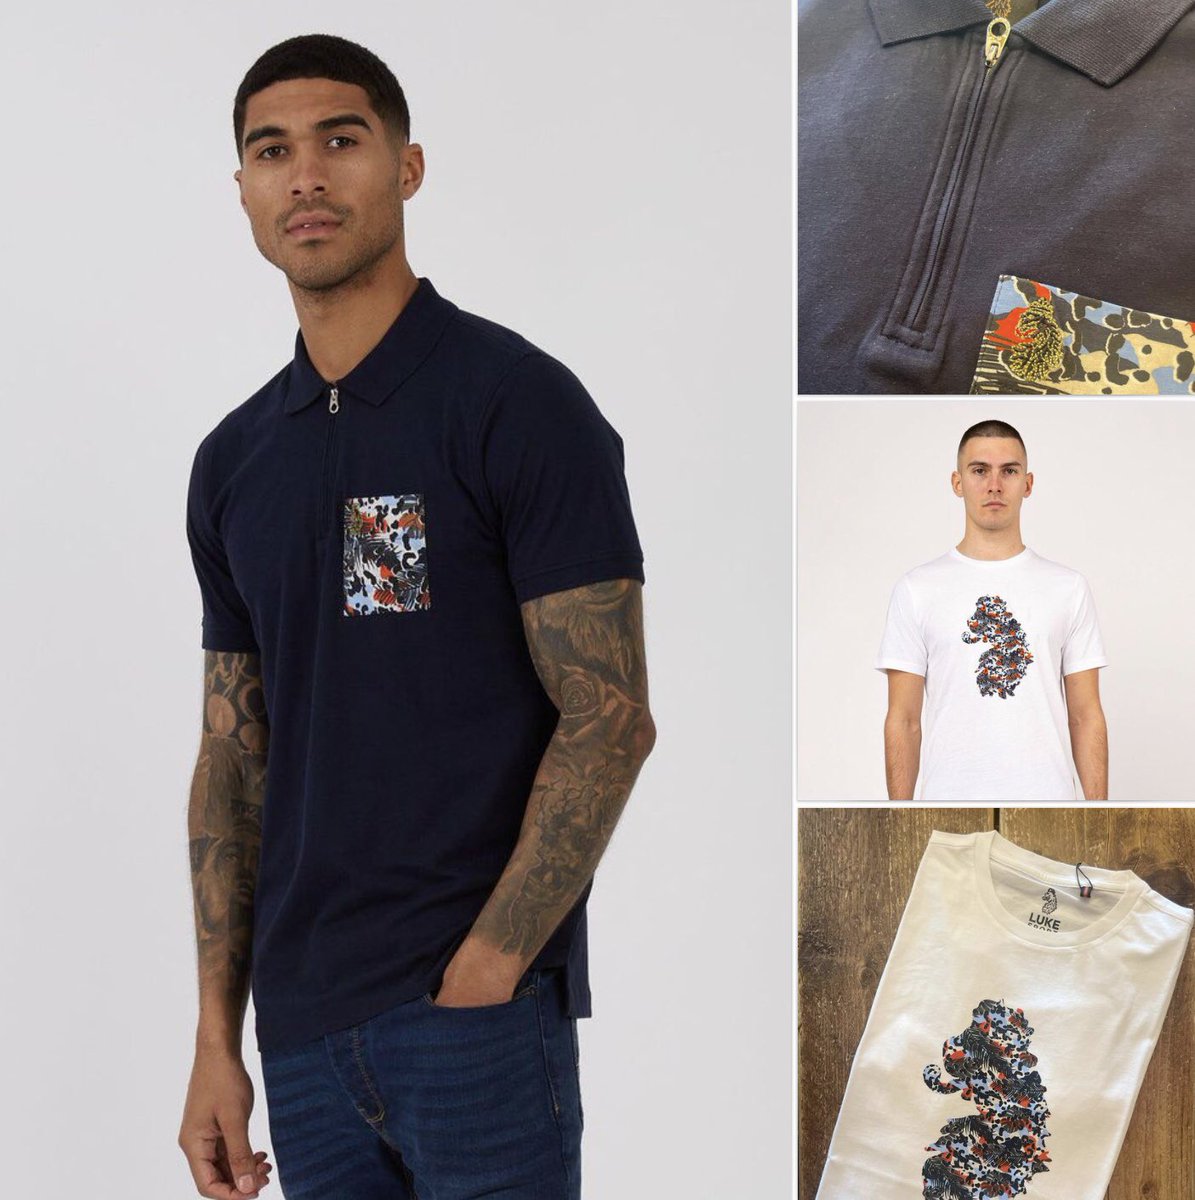 More summer stock has arrived just in time for the sunshine over the weekend and next week!

Also if you’re looking for last minute holiday clothes for the half term break - pop in and take a look!

#summervibes #bromsgrove #menssummerfashion